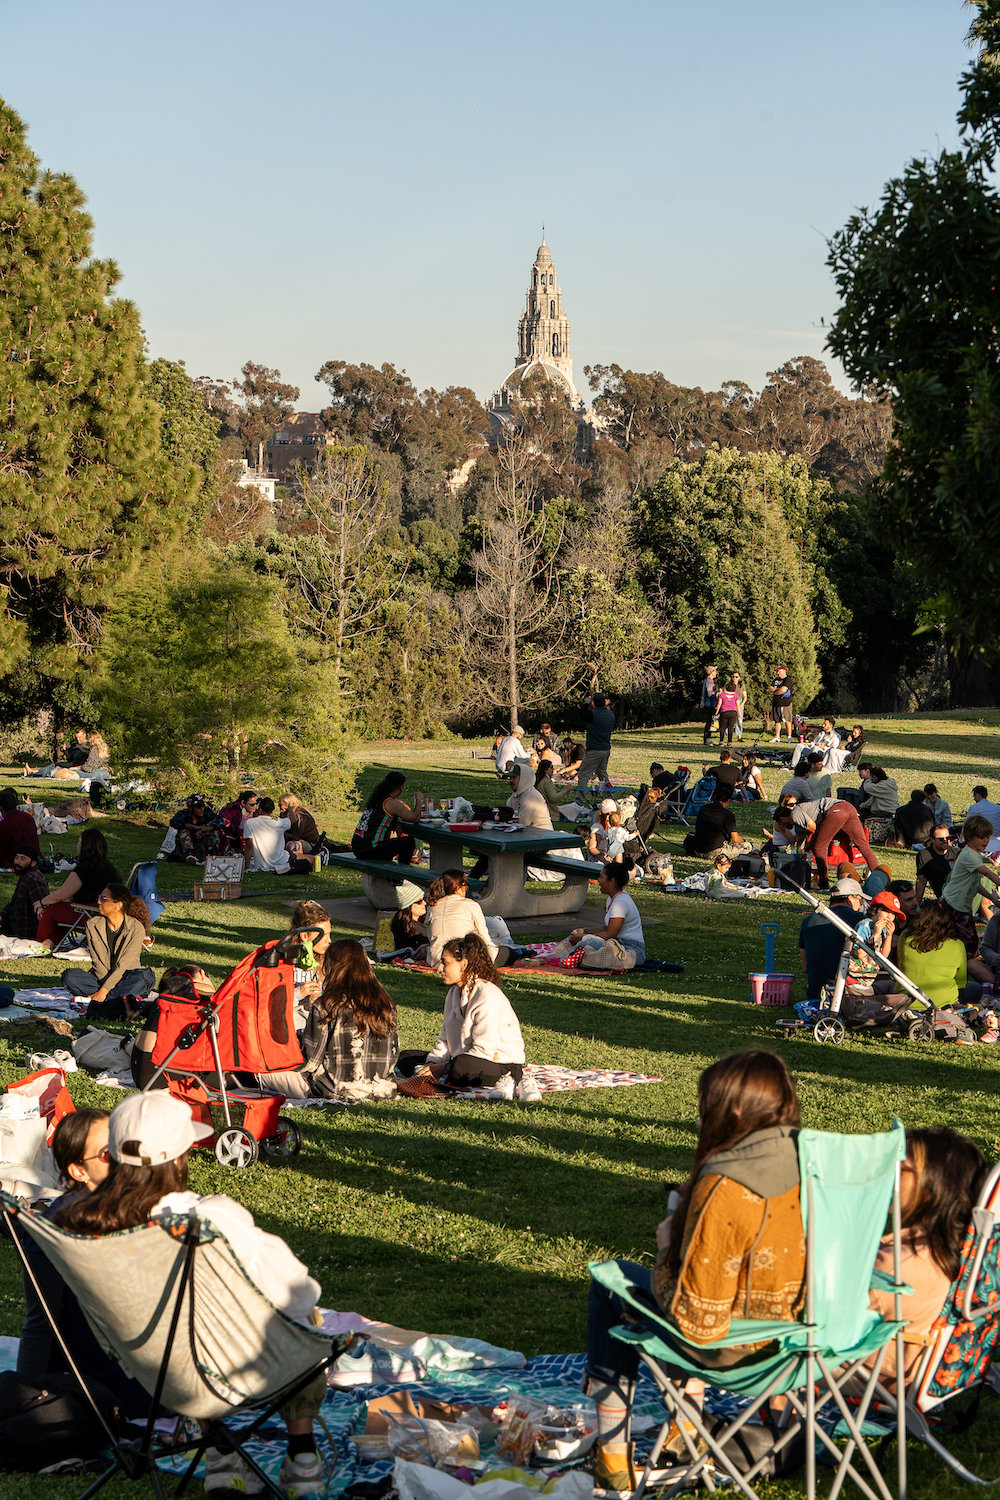 The San Diego Winyl Club featuring live DJs, picnics, wine, and charcuterie every Wednesday at Balboa Park